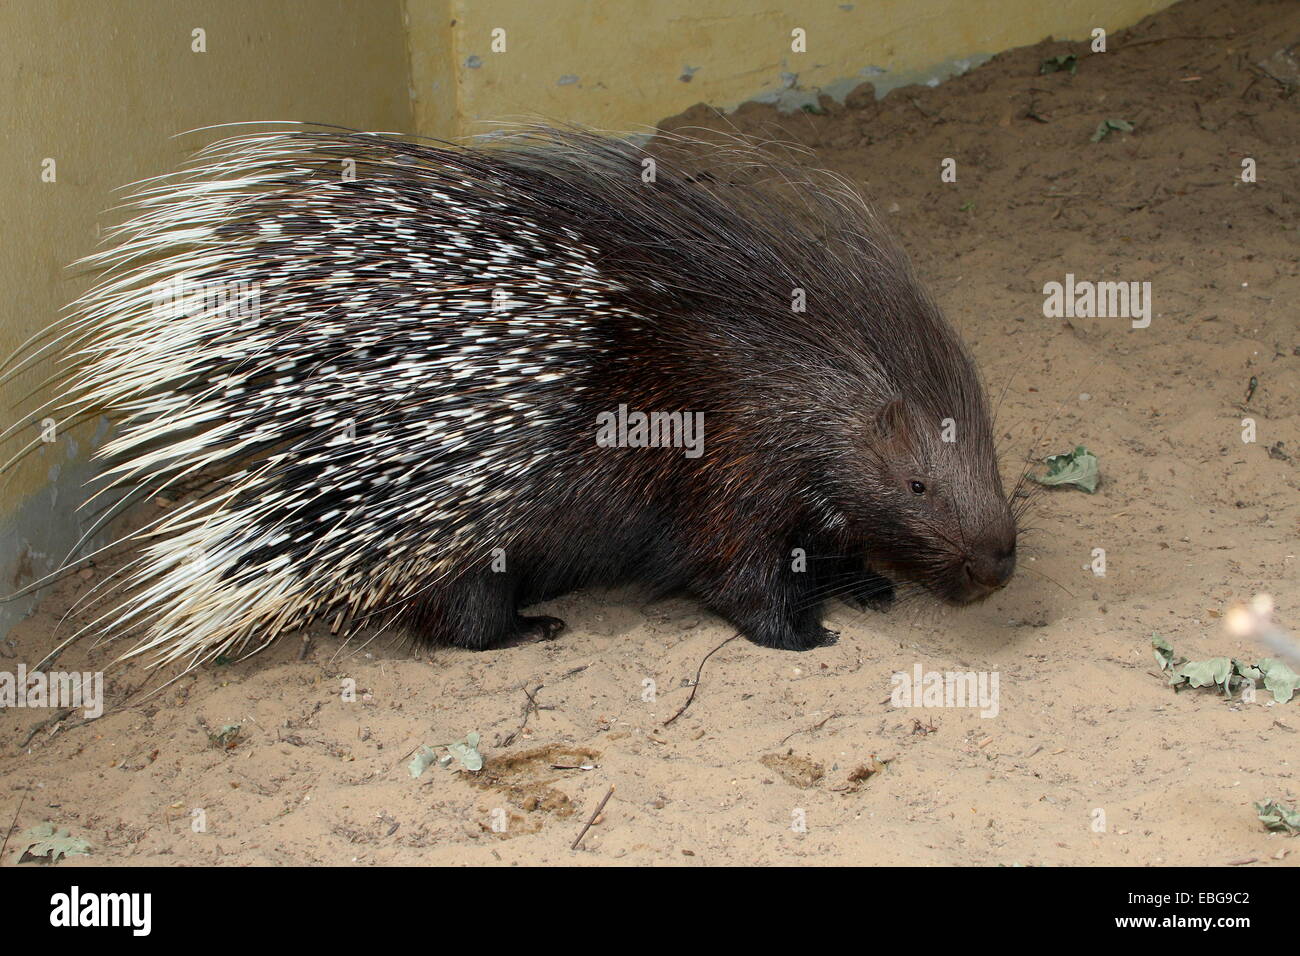 Male Indian crested porcupine (Hystrix indica) at Dierenpark Emmen Zoo Stock Photo